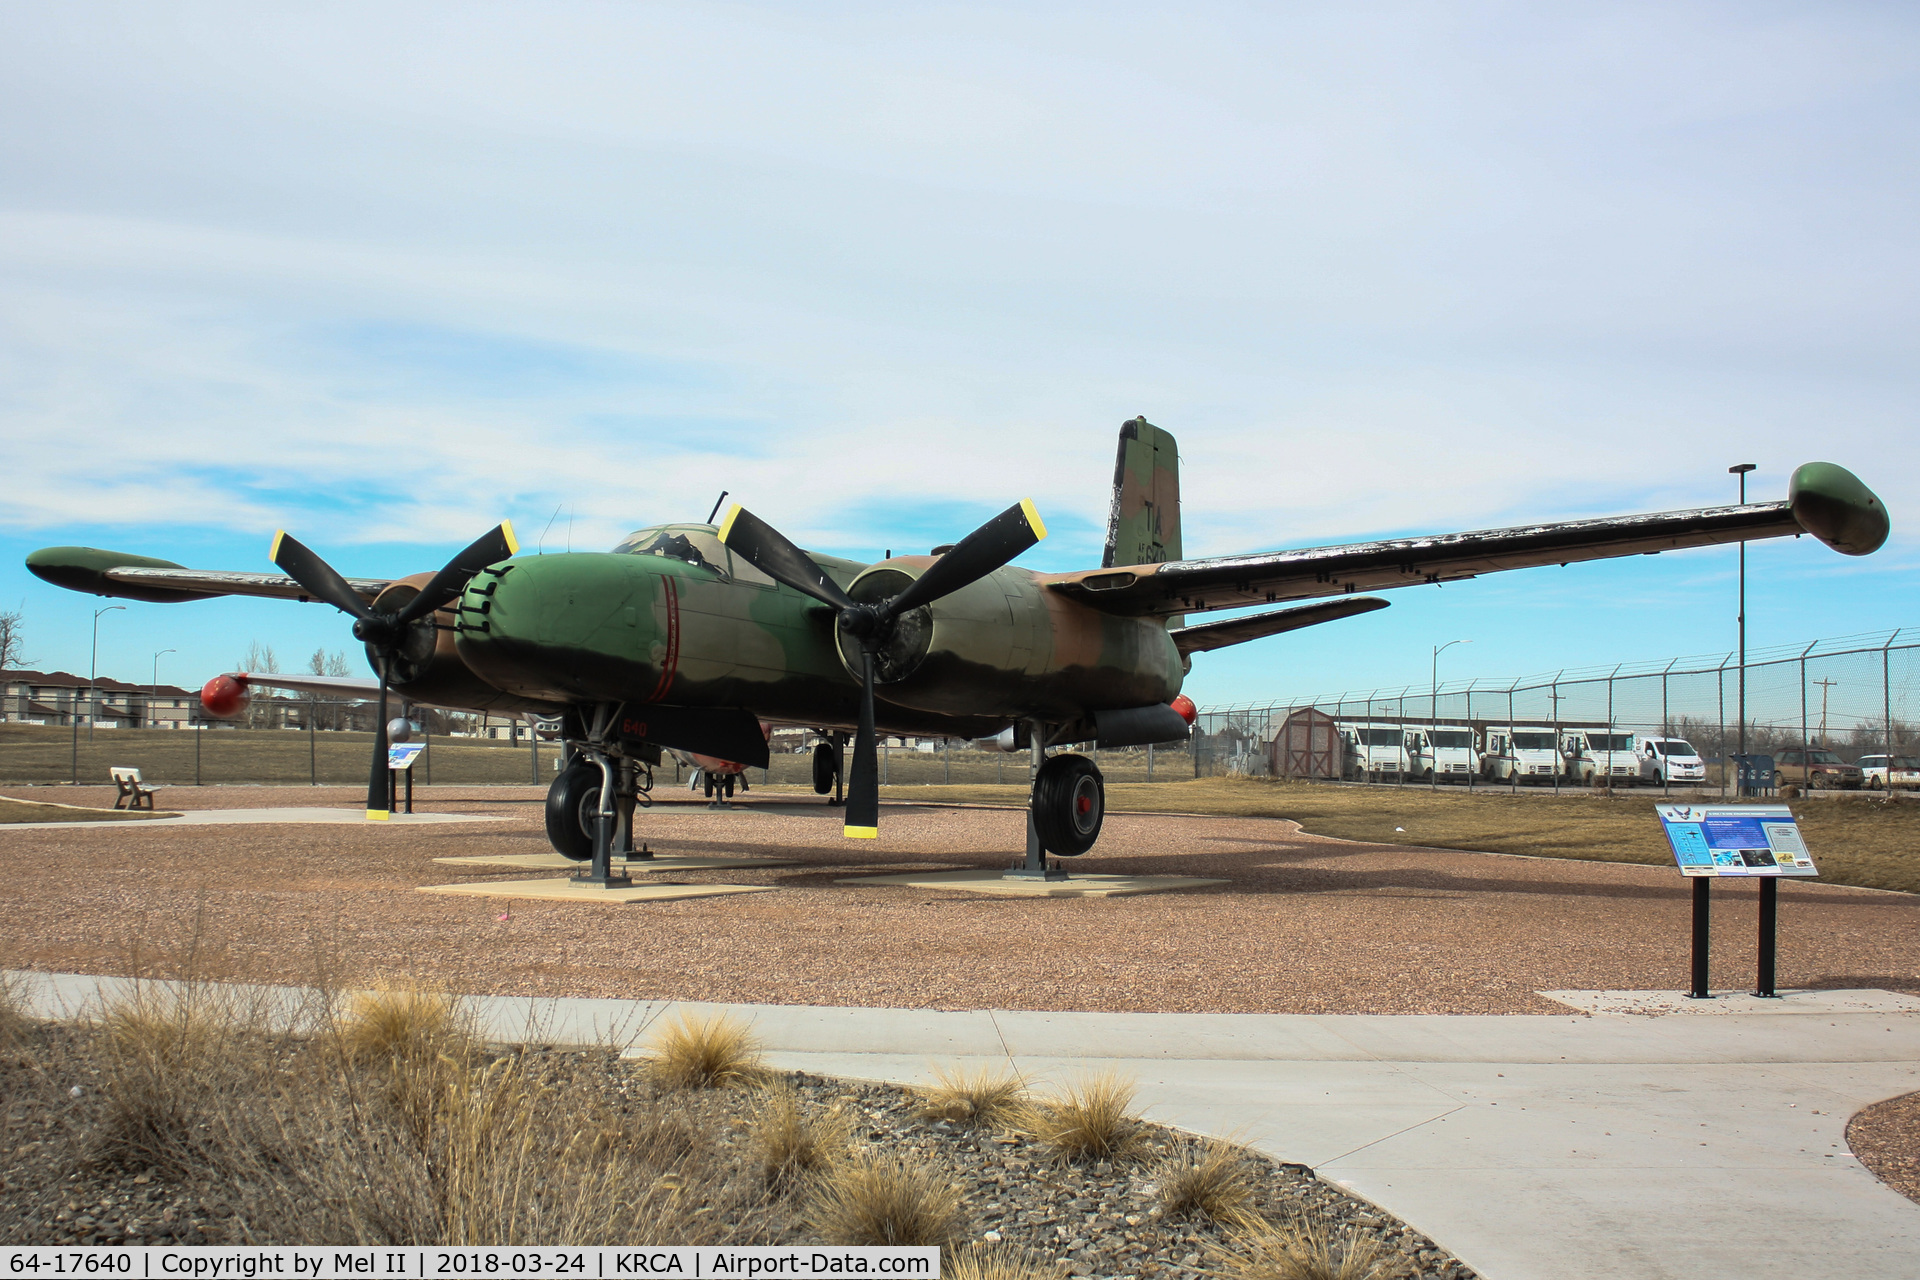 64-17640, 1964 Douglas-On Mark B-26K Counter Invader C/N 29175 (was 44-35896), On display at the South Dakota Air and Space Museum at Ellsworth Air Force Base.